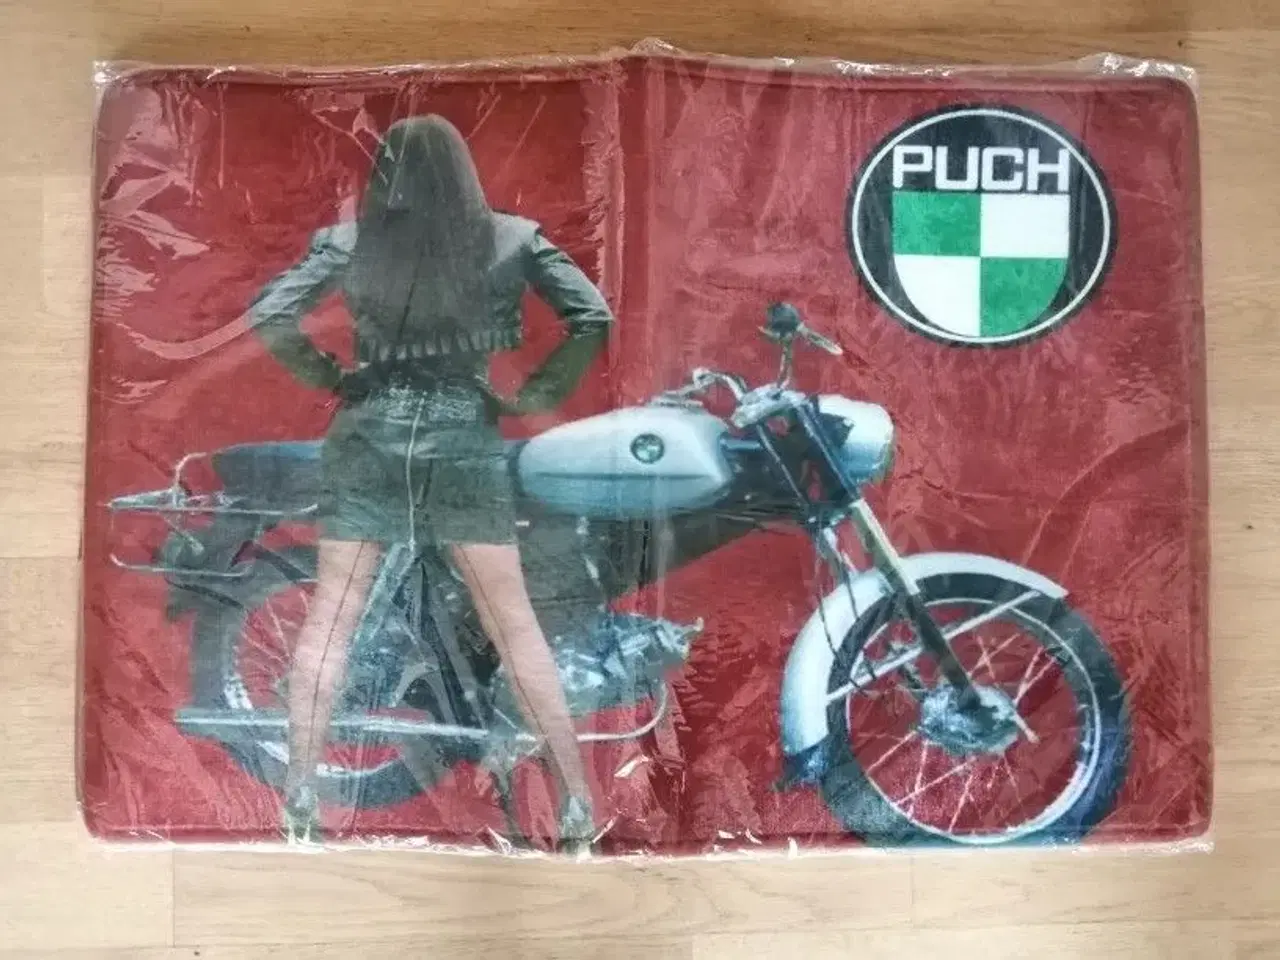 Billede 8 - vespa ciao, Puch maxi, puch vz50, puch ms50, 300kr